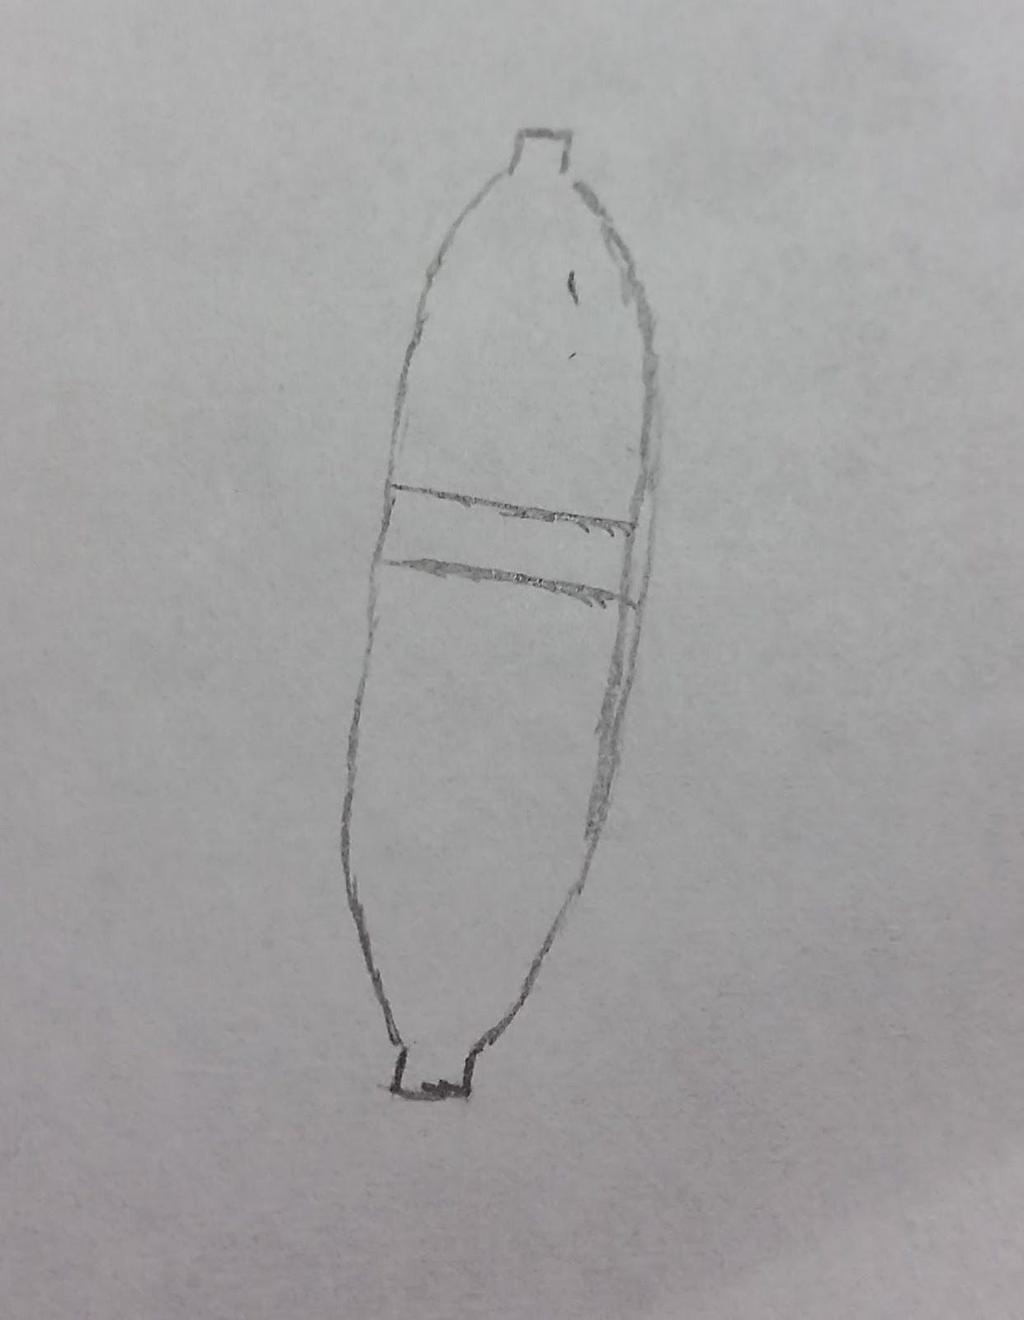 One rocket had the bottom of the two bottles spliced together (see figure 1), the other rocket had the bottom cut out of one bottle and the neck of the second